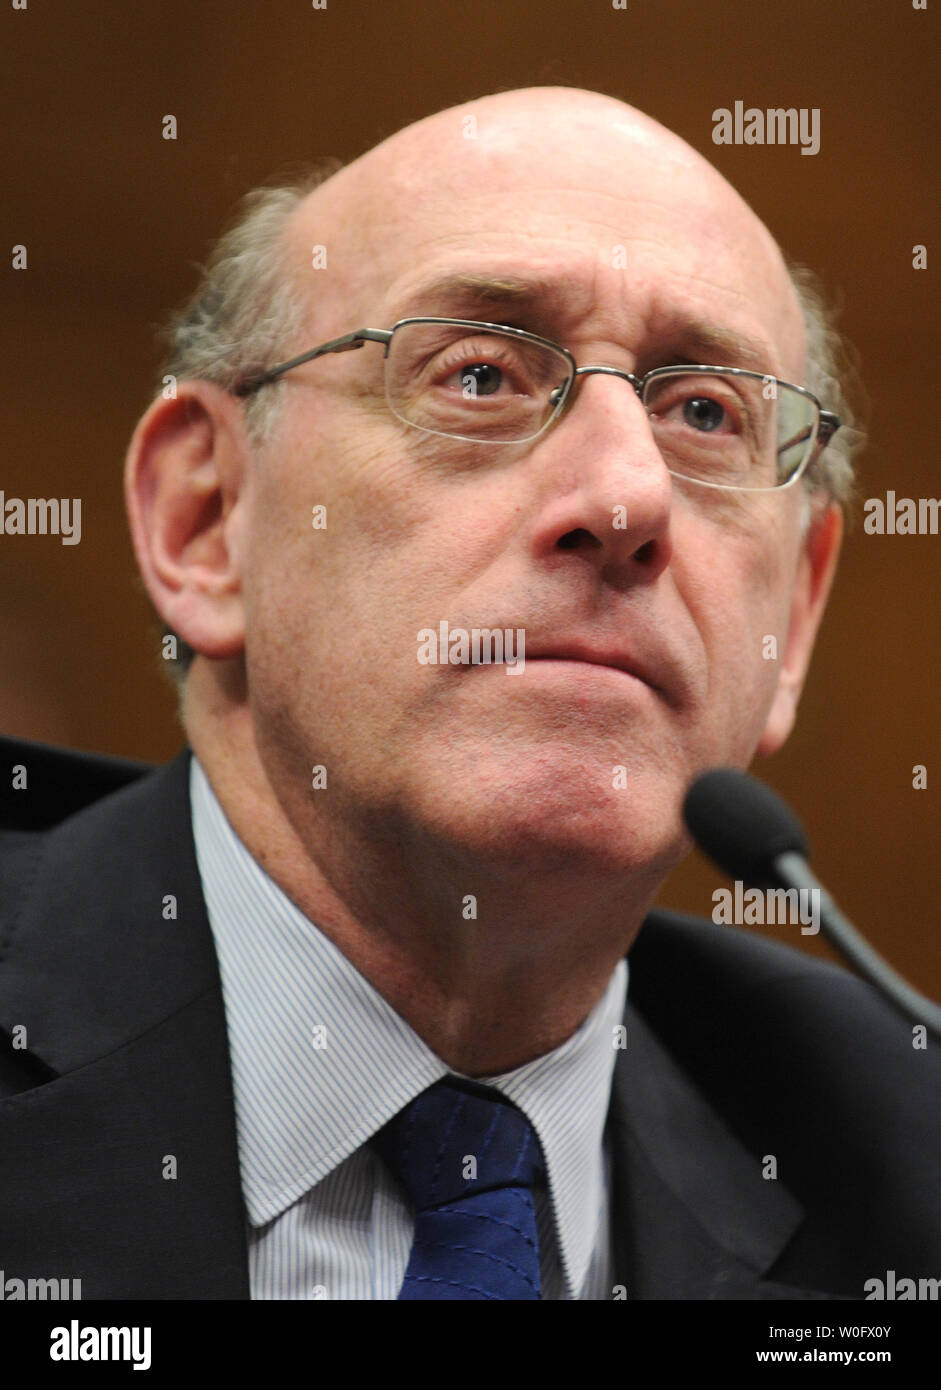 Kenneth Feinberg, administrator of the BP Oil Spill Victim Compensation Fund, testifies before a House Judiciary Committee hearing on 'Ensuring Justice for Victims of the Gulf Coast Oil Disaster in Washington on July 21, 2010.   UPI/Kevin Dietsch. Stock Photo